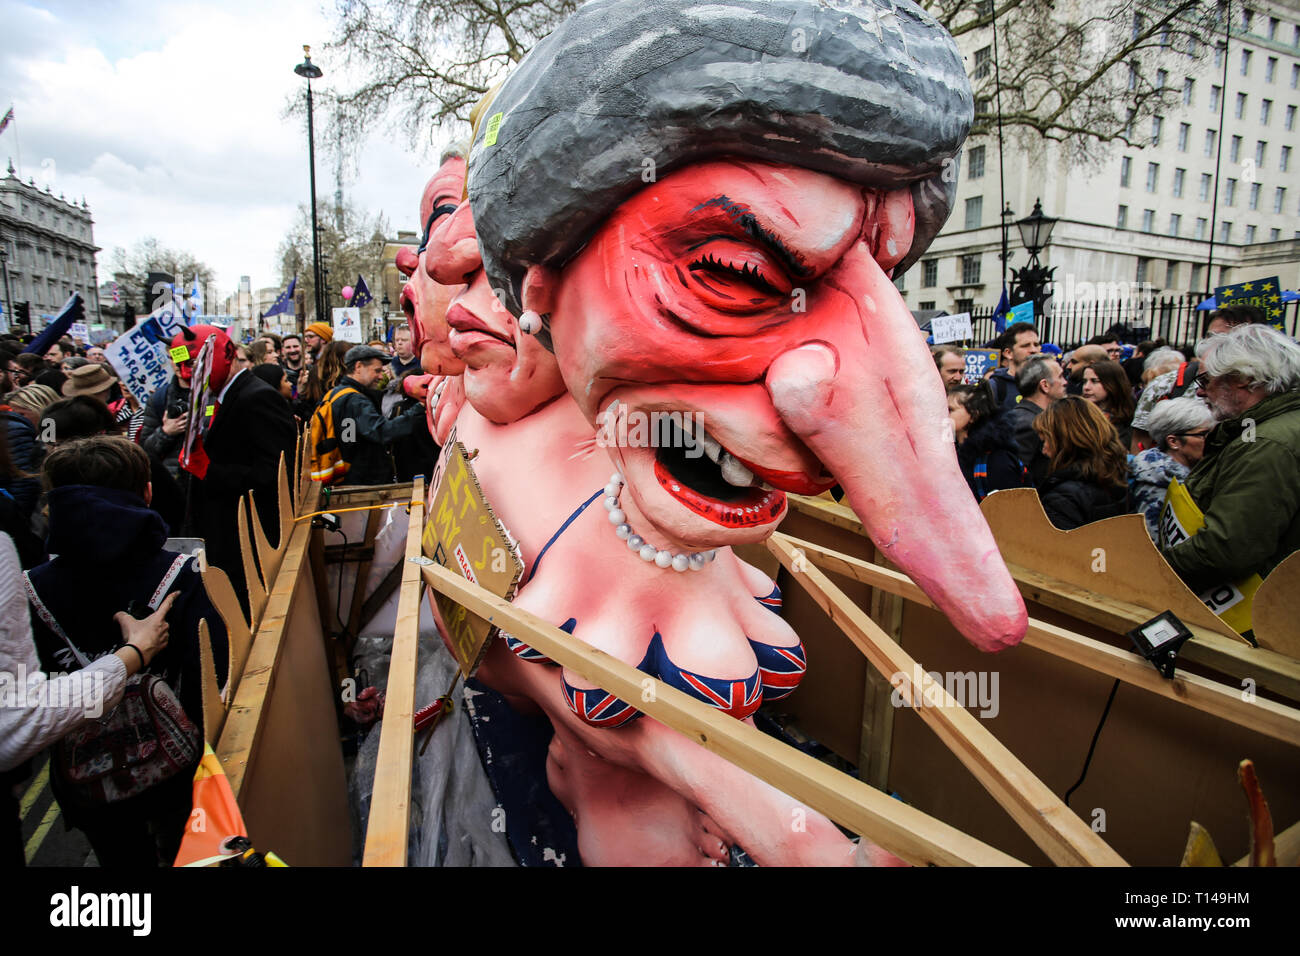 Float including grotesque caricatures of Boris Johnson, Michael Gove and Theresa May, The People's Vote March, London, March 2019 Stock Photo